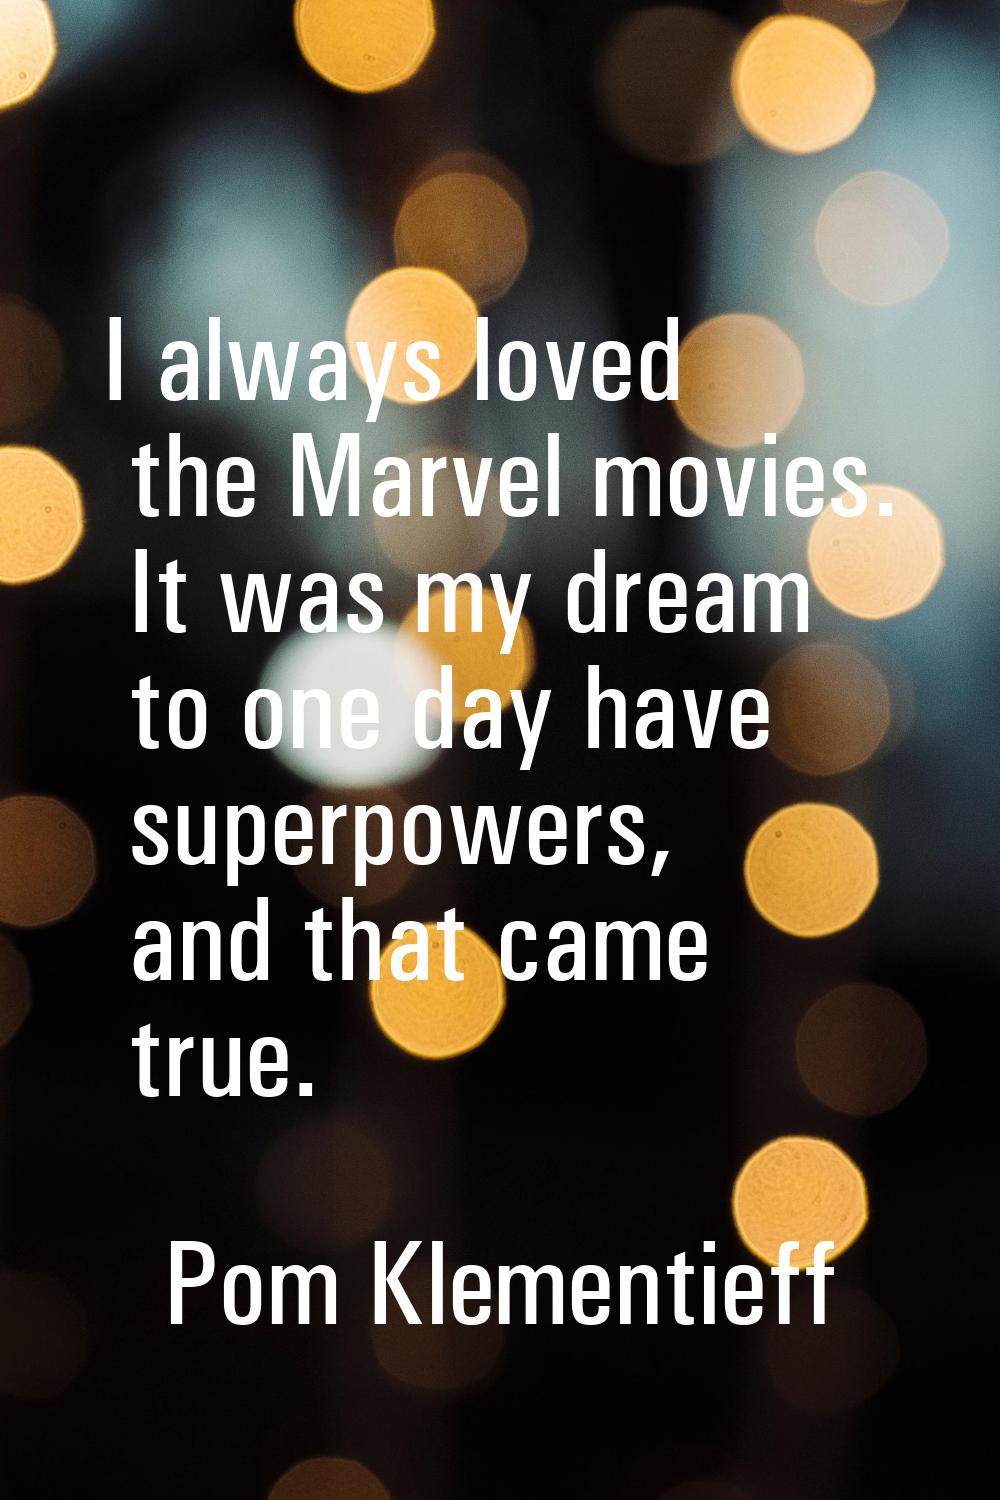 I always loved the Marvel movies. It was my dream to one day have superpowers, and that came true.